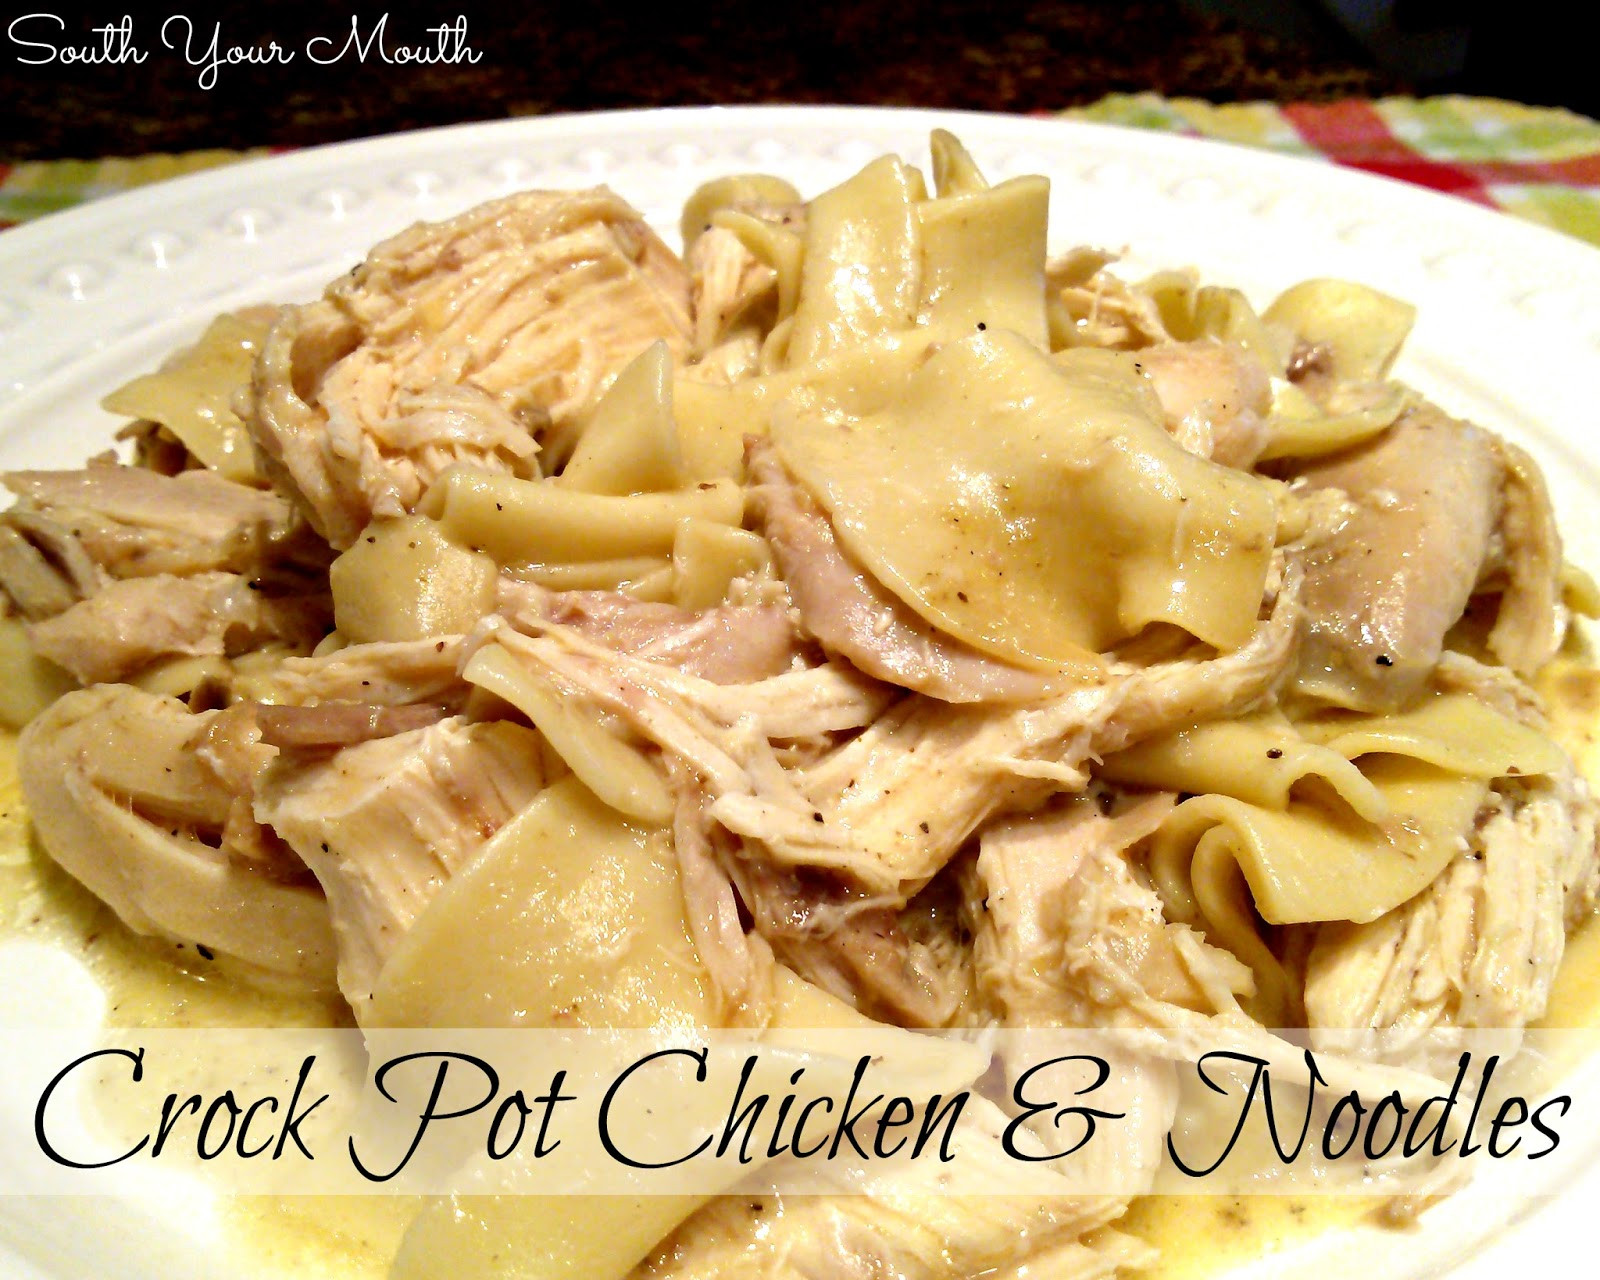 Chicken And Dumplings With Noodles
 South Your Mouth Crock Pot Chicken and Noodles